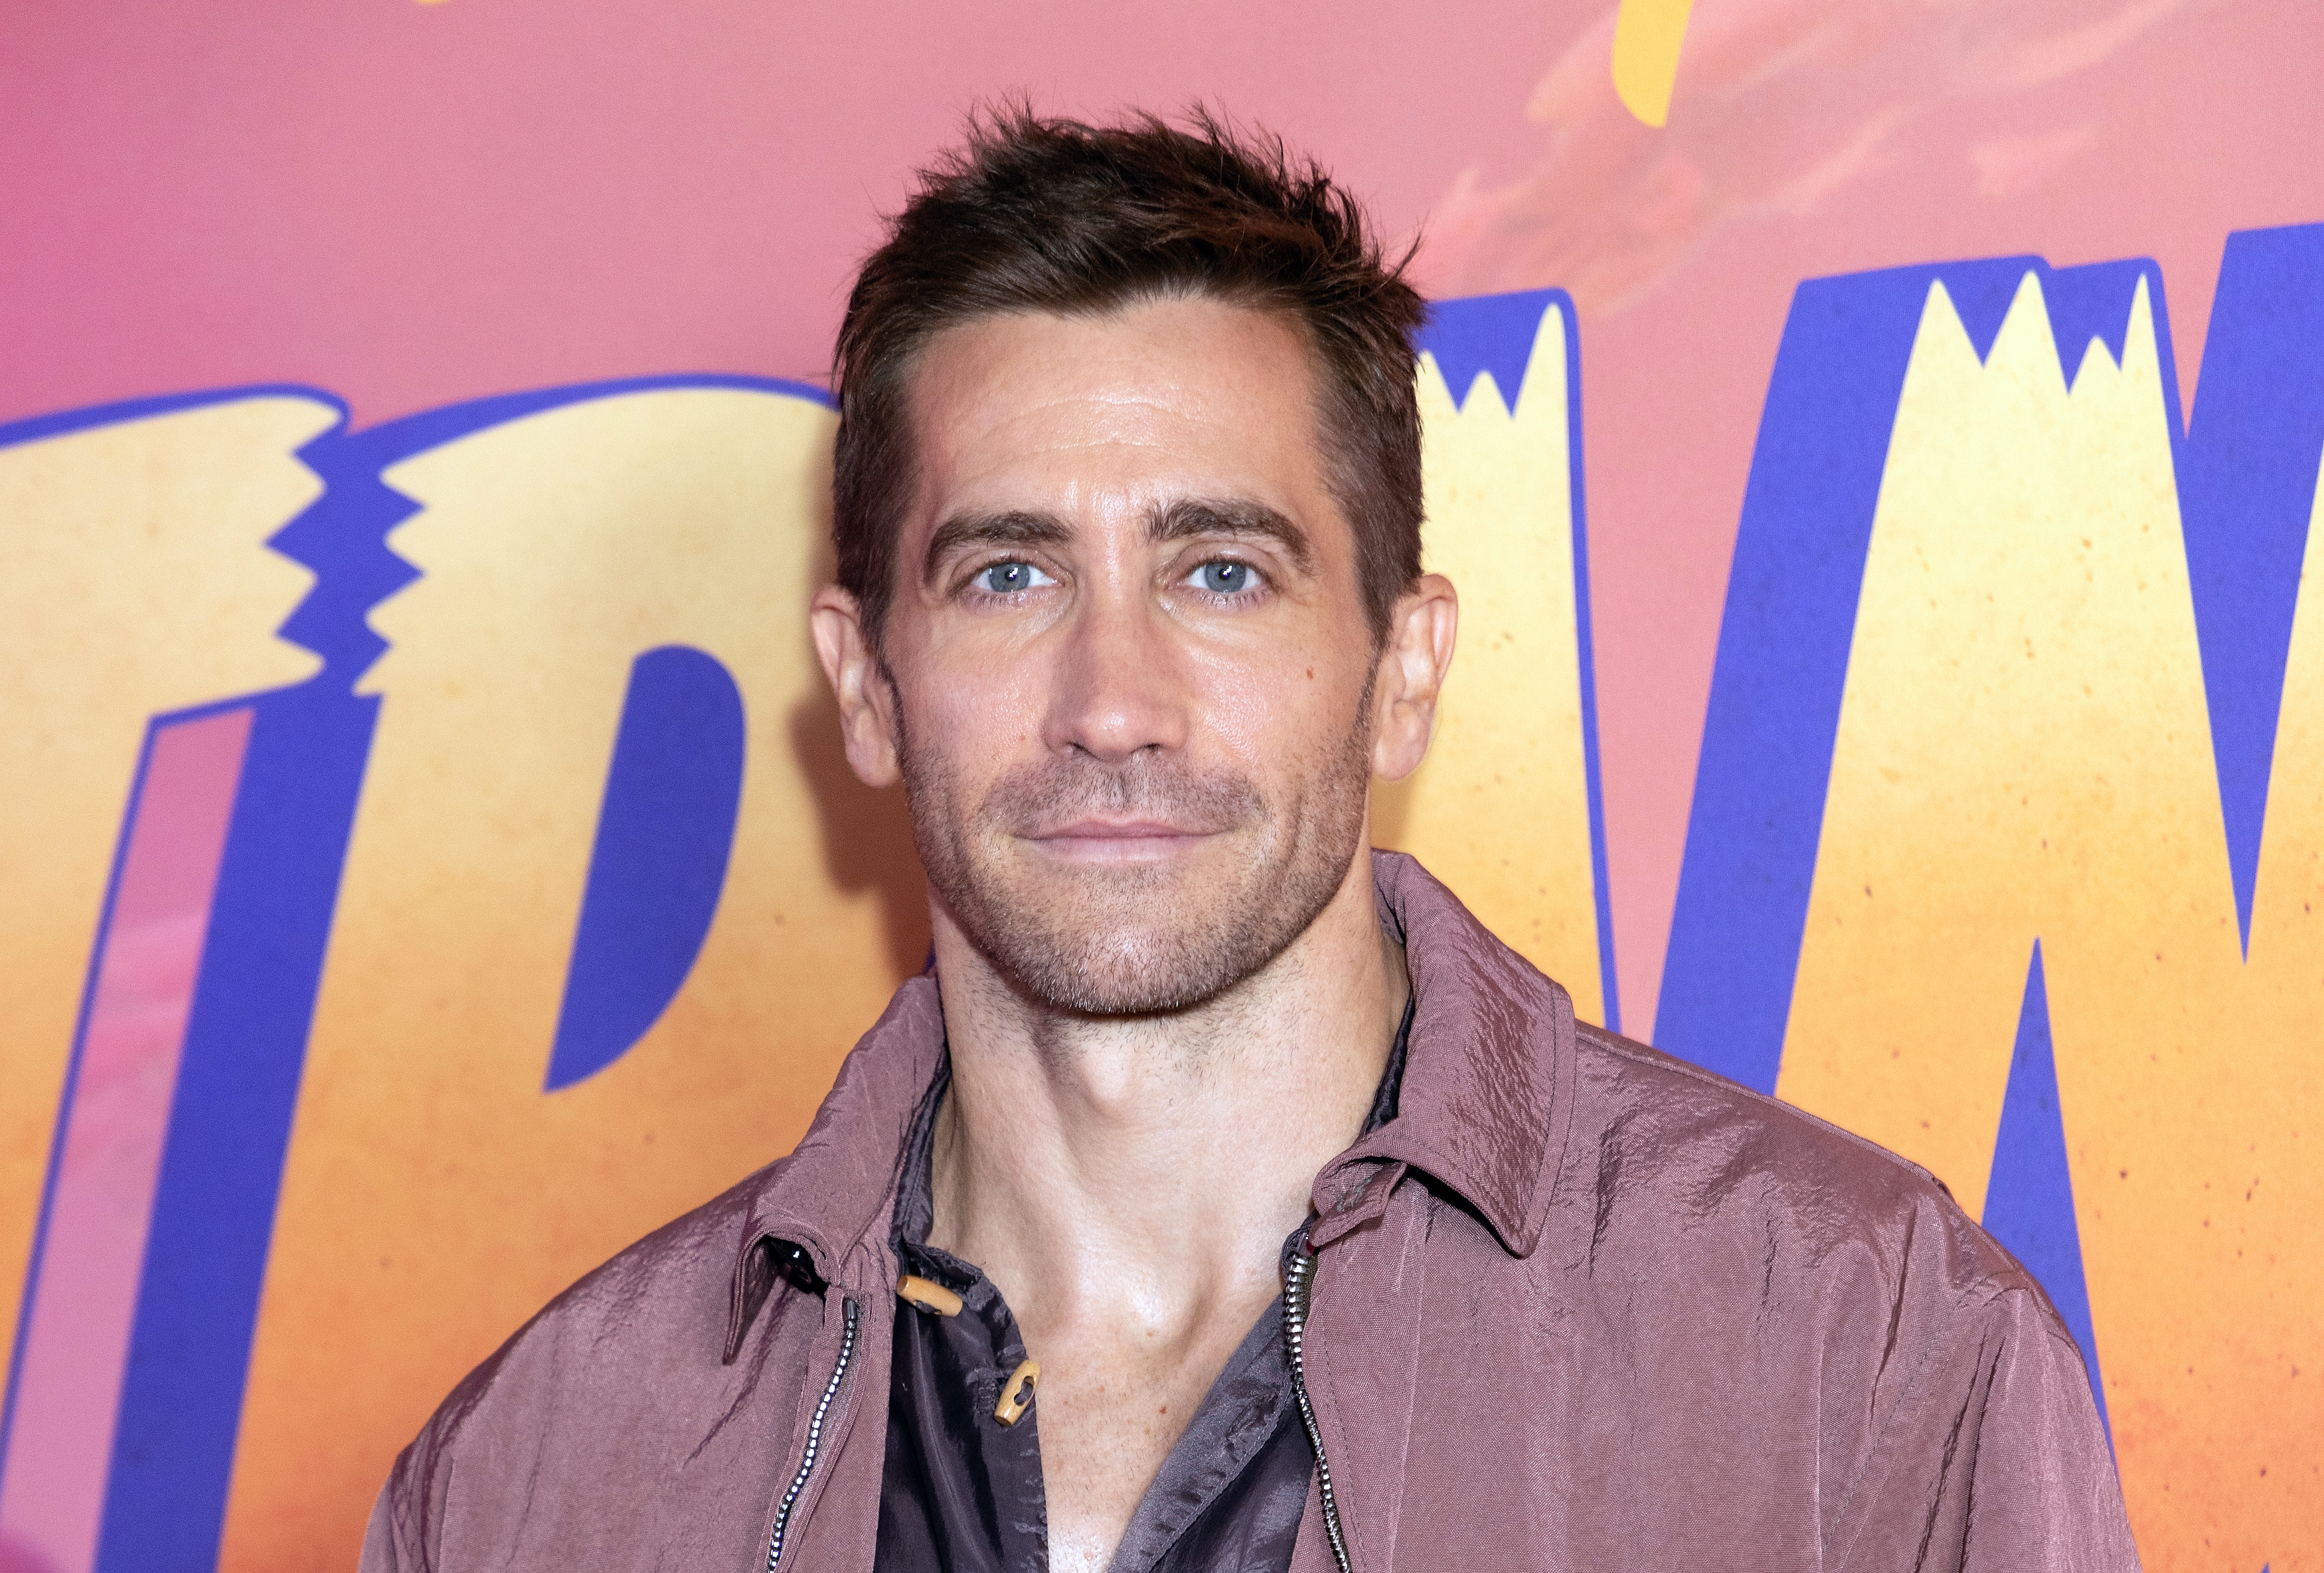 Close-up of Jake at a media event